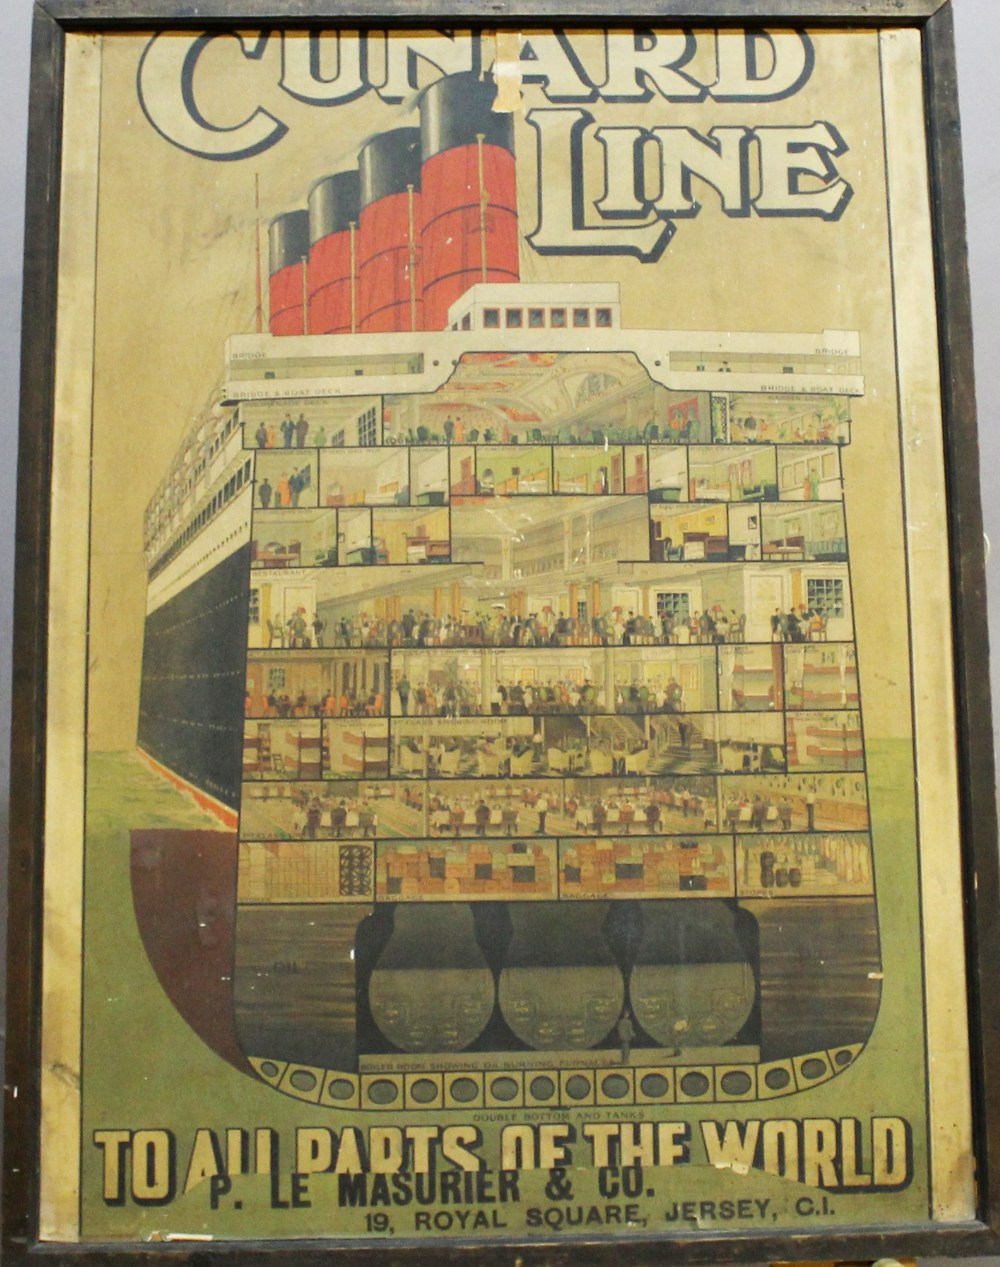 A CUNARD LINE 'TO ALL PARTS OF THE WORD' POSTER by P Le Mesurier & Co, 19 Royal Square, Jersey, C.I, - Image 2 of 2